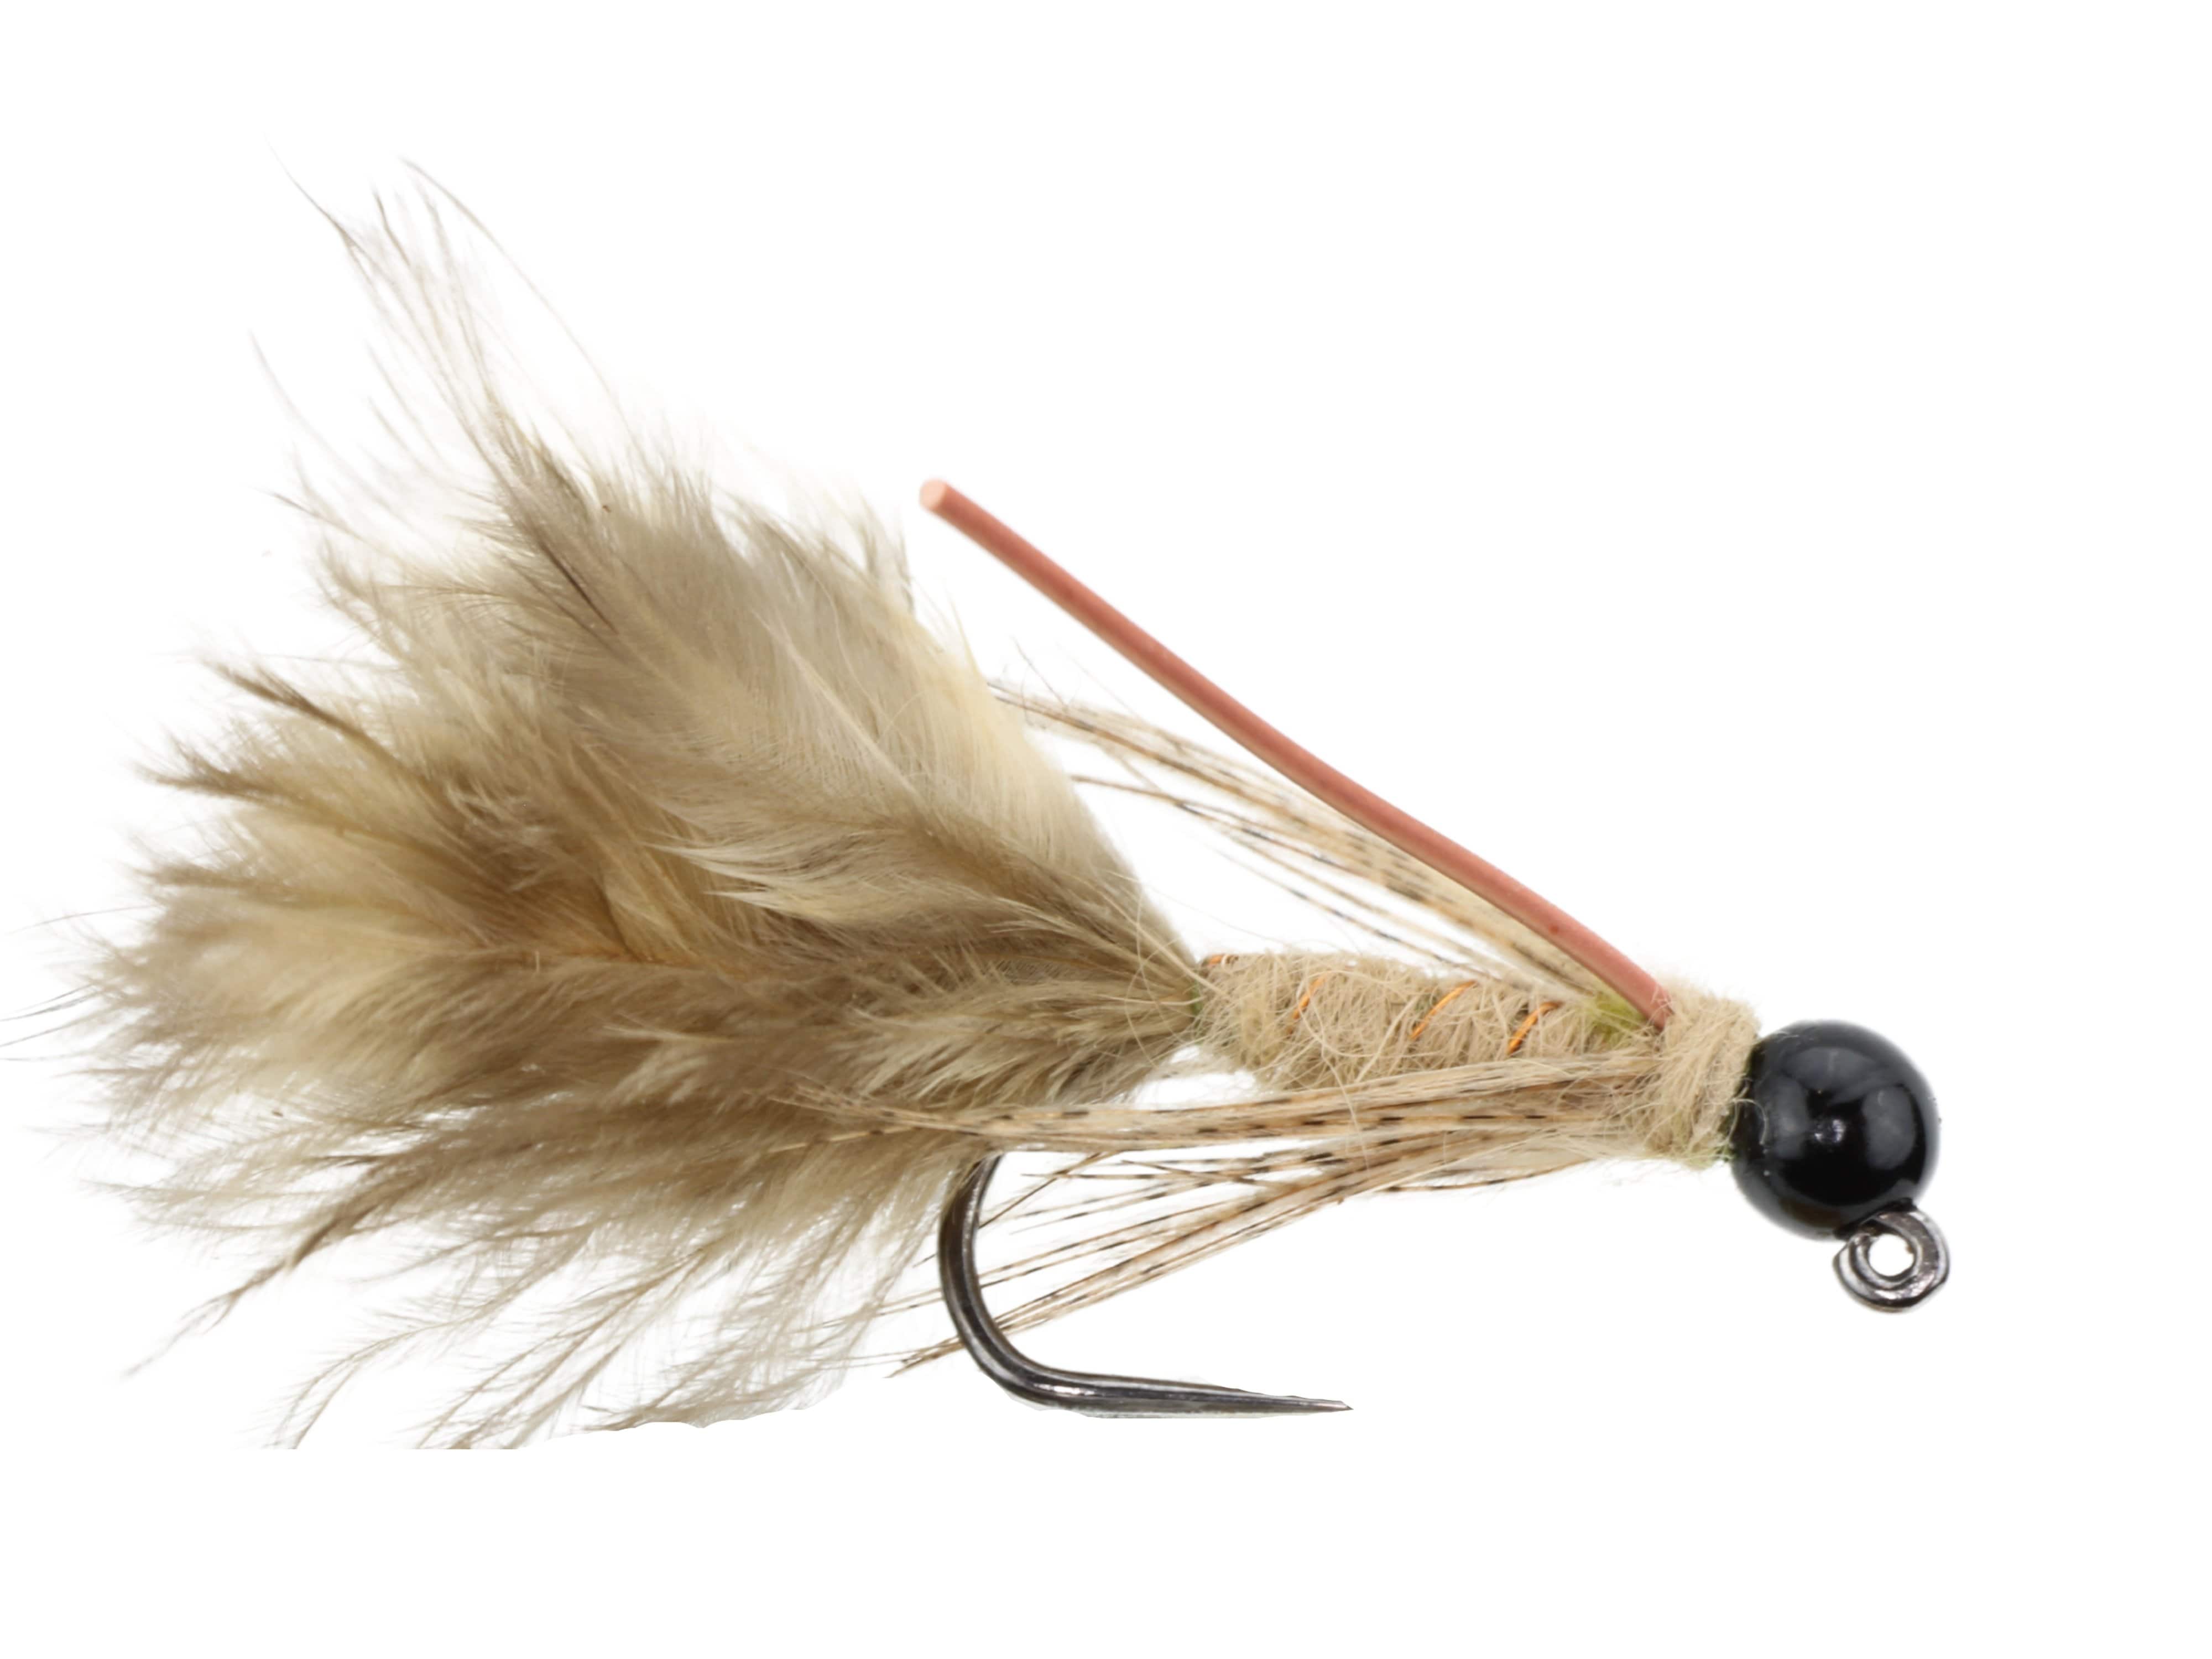 Wild Water Fly Fishing Tungsten Bead Head Tan Wooly Bugger with Rubber Legs, Size 10, Qty. 6